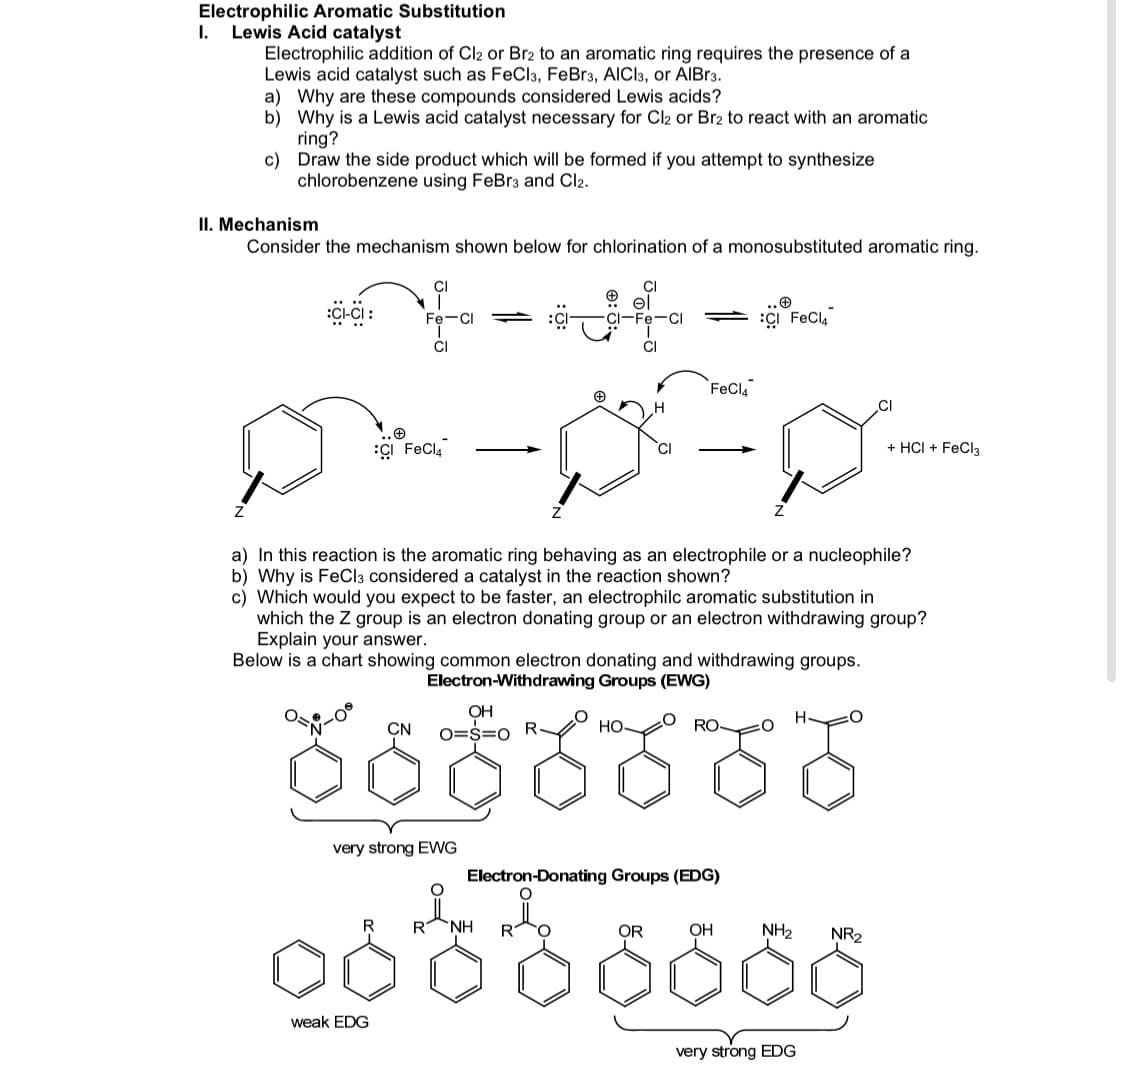 Electrophilic Aromatic Substitution
I.
Lewis Acid catalyst
Electrophilic addition of Cl2 or Br2 to an aromatic ring requires the presence of a
Lewis acid catalyst such as FeCla, FeBr3, AICI3, or AIBR3.
a) Why are these compounds considered Lewis acids?
b) Why is a Lewis acid catalyst necessary for Cl2 or Br2 to react with an aromatic
ring?
c) Draw the side product which will be formed if you attempt to synthesize
chlorobenzene using FeBr3 and Cl2.
II. Mechanism
Consider the mechanism shown below for chlorination of a monosubstituted aromatic ring.
CI
CI-Fe-C
ÇI FeCl,
Fe-CI
CI
FeCla
CI
ÇI FeCla
+ HCI + FeCl3
a) In this reaction is the aromatic ring behaving as an electrophile or a nucleophile?
b) Why is FeCla considered a catalyst in the reaction shown?
c) Which would you expect to be faster, an electrophilc aromatic substitution in
which the Z group is an electron donating group or an electron withdrawing group?
Explain your answer.
Below is a chart showing common electron donating and withdrawing groups.
Electron-Withdrawing Groups (EWG)
రంరంరం
OH
CN
O=S=0
НО
RO
very strong EWG
Electron-Donating Groups (EDG)
R
R NH
R
OR
OH
NH2
NR2
weak EDG
very strong EDG
